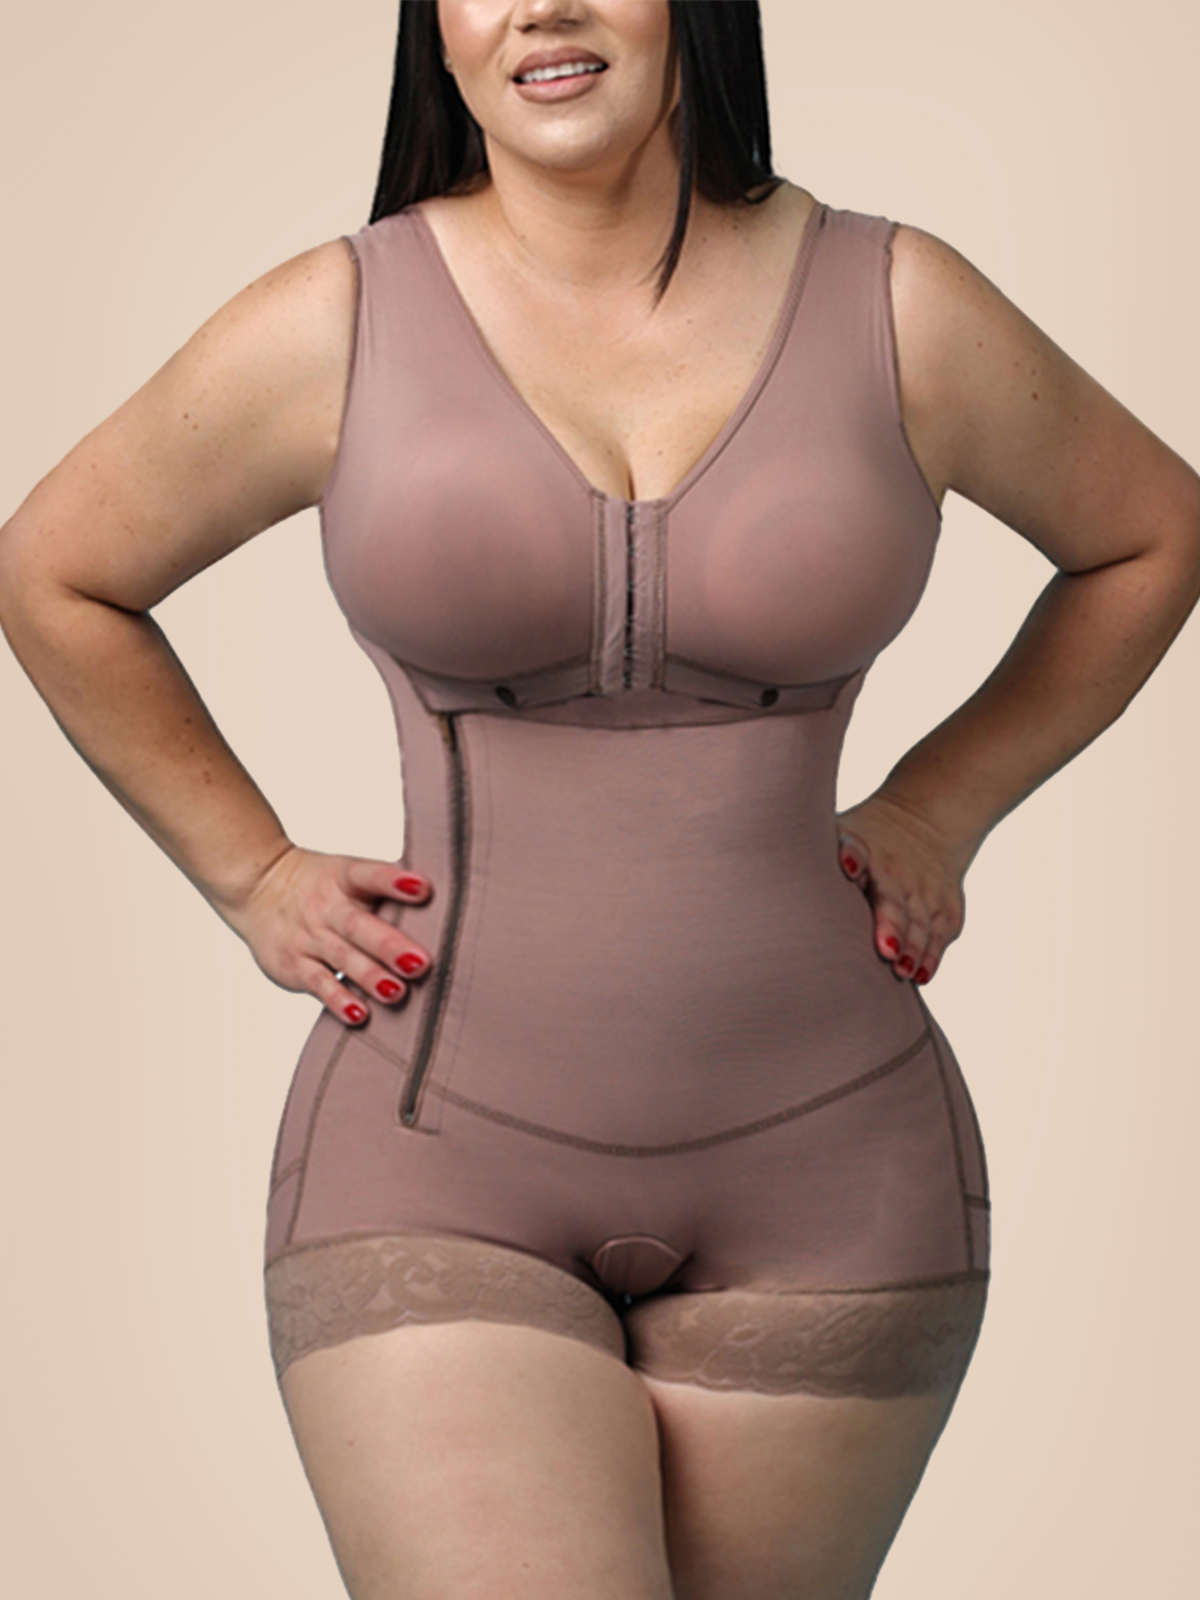 GREAT QUALITY SHAPEWEAR AT AFFORDABLE PRICES! REVIEWING SHAPEWEAR FROM  CHIC-CURVE.COM 